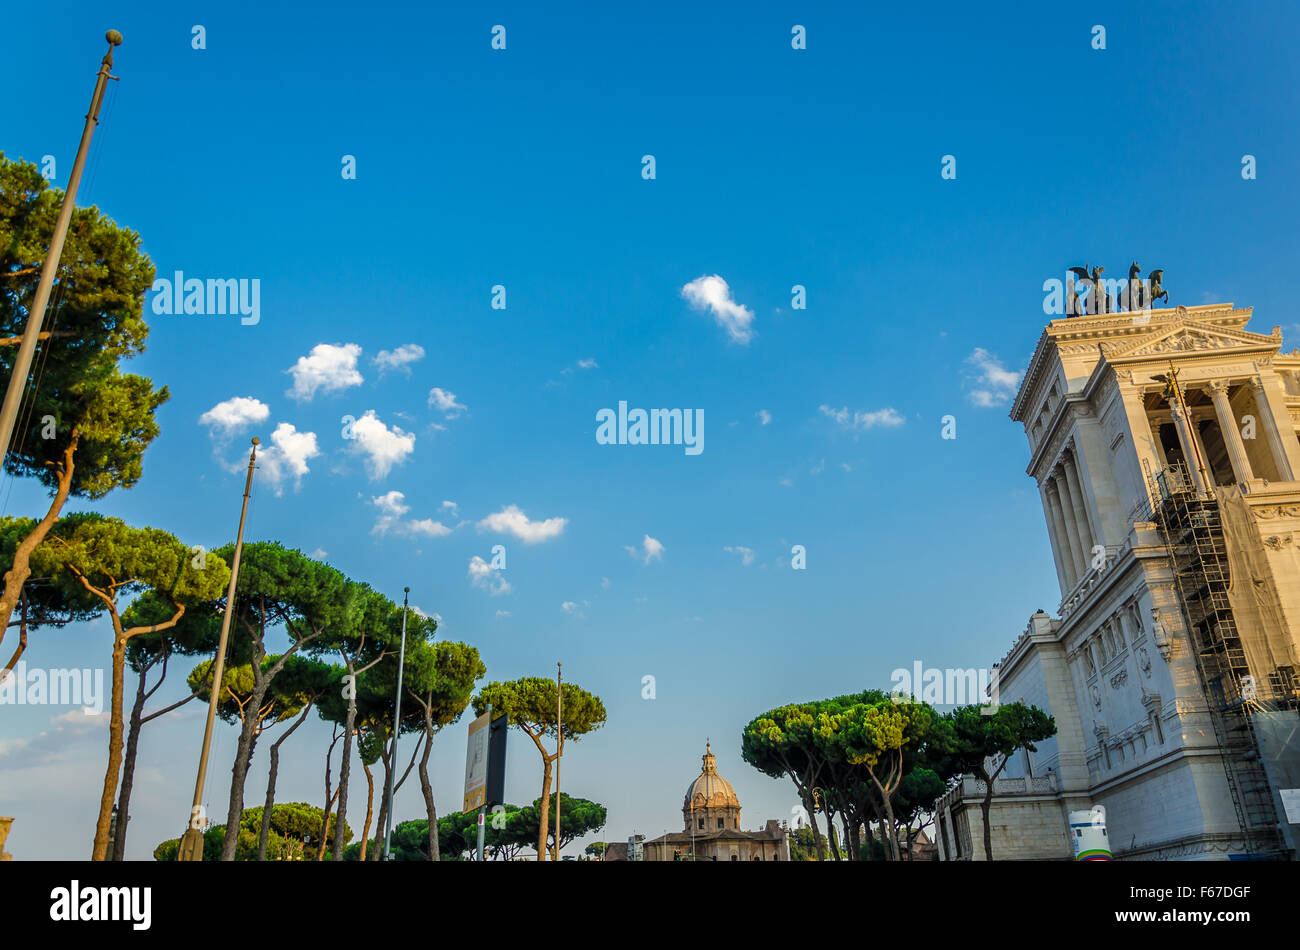 Sky and trees of Rome next to the Trajan's market and Altar of the Fatherland (Altare della Partia) before sunset. Stock Photo